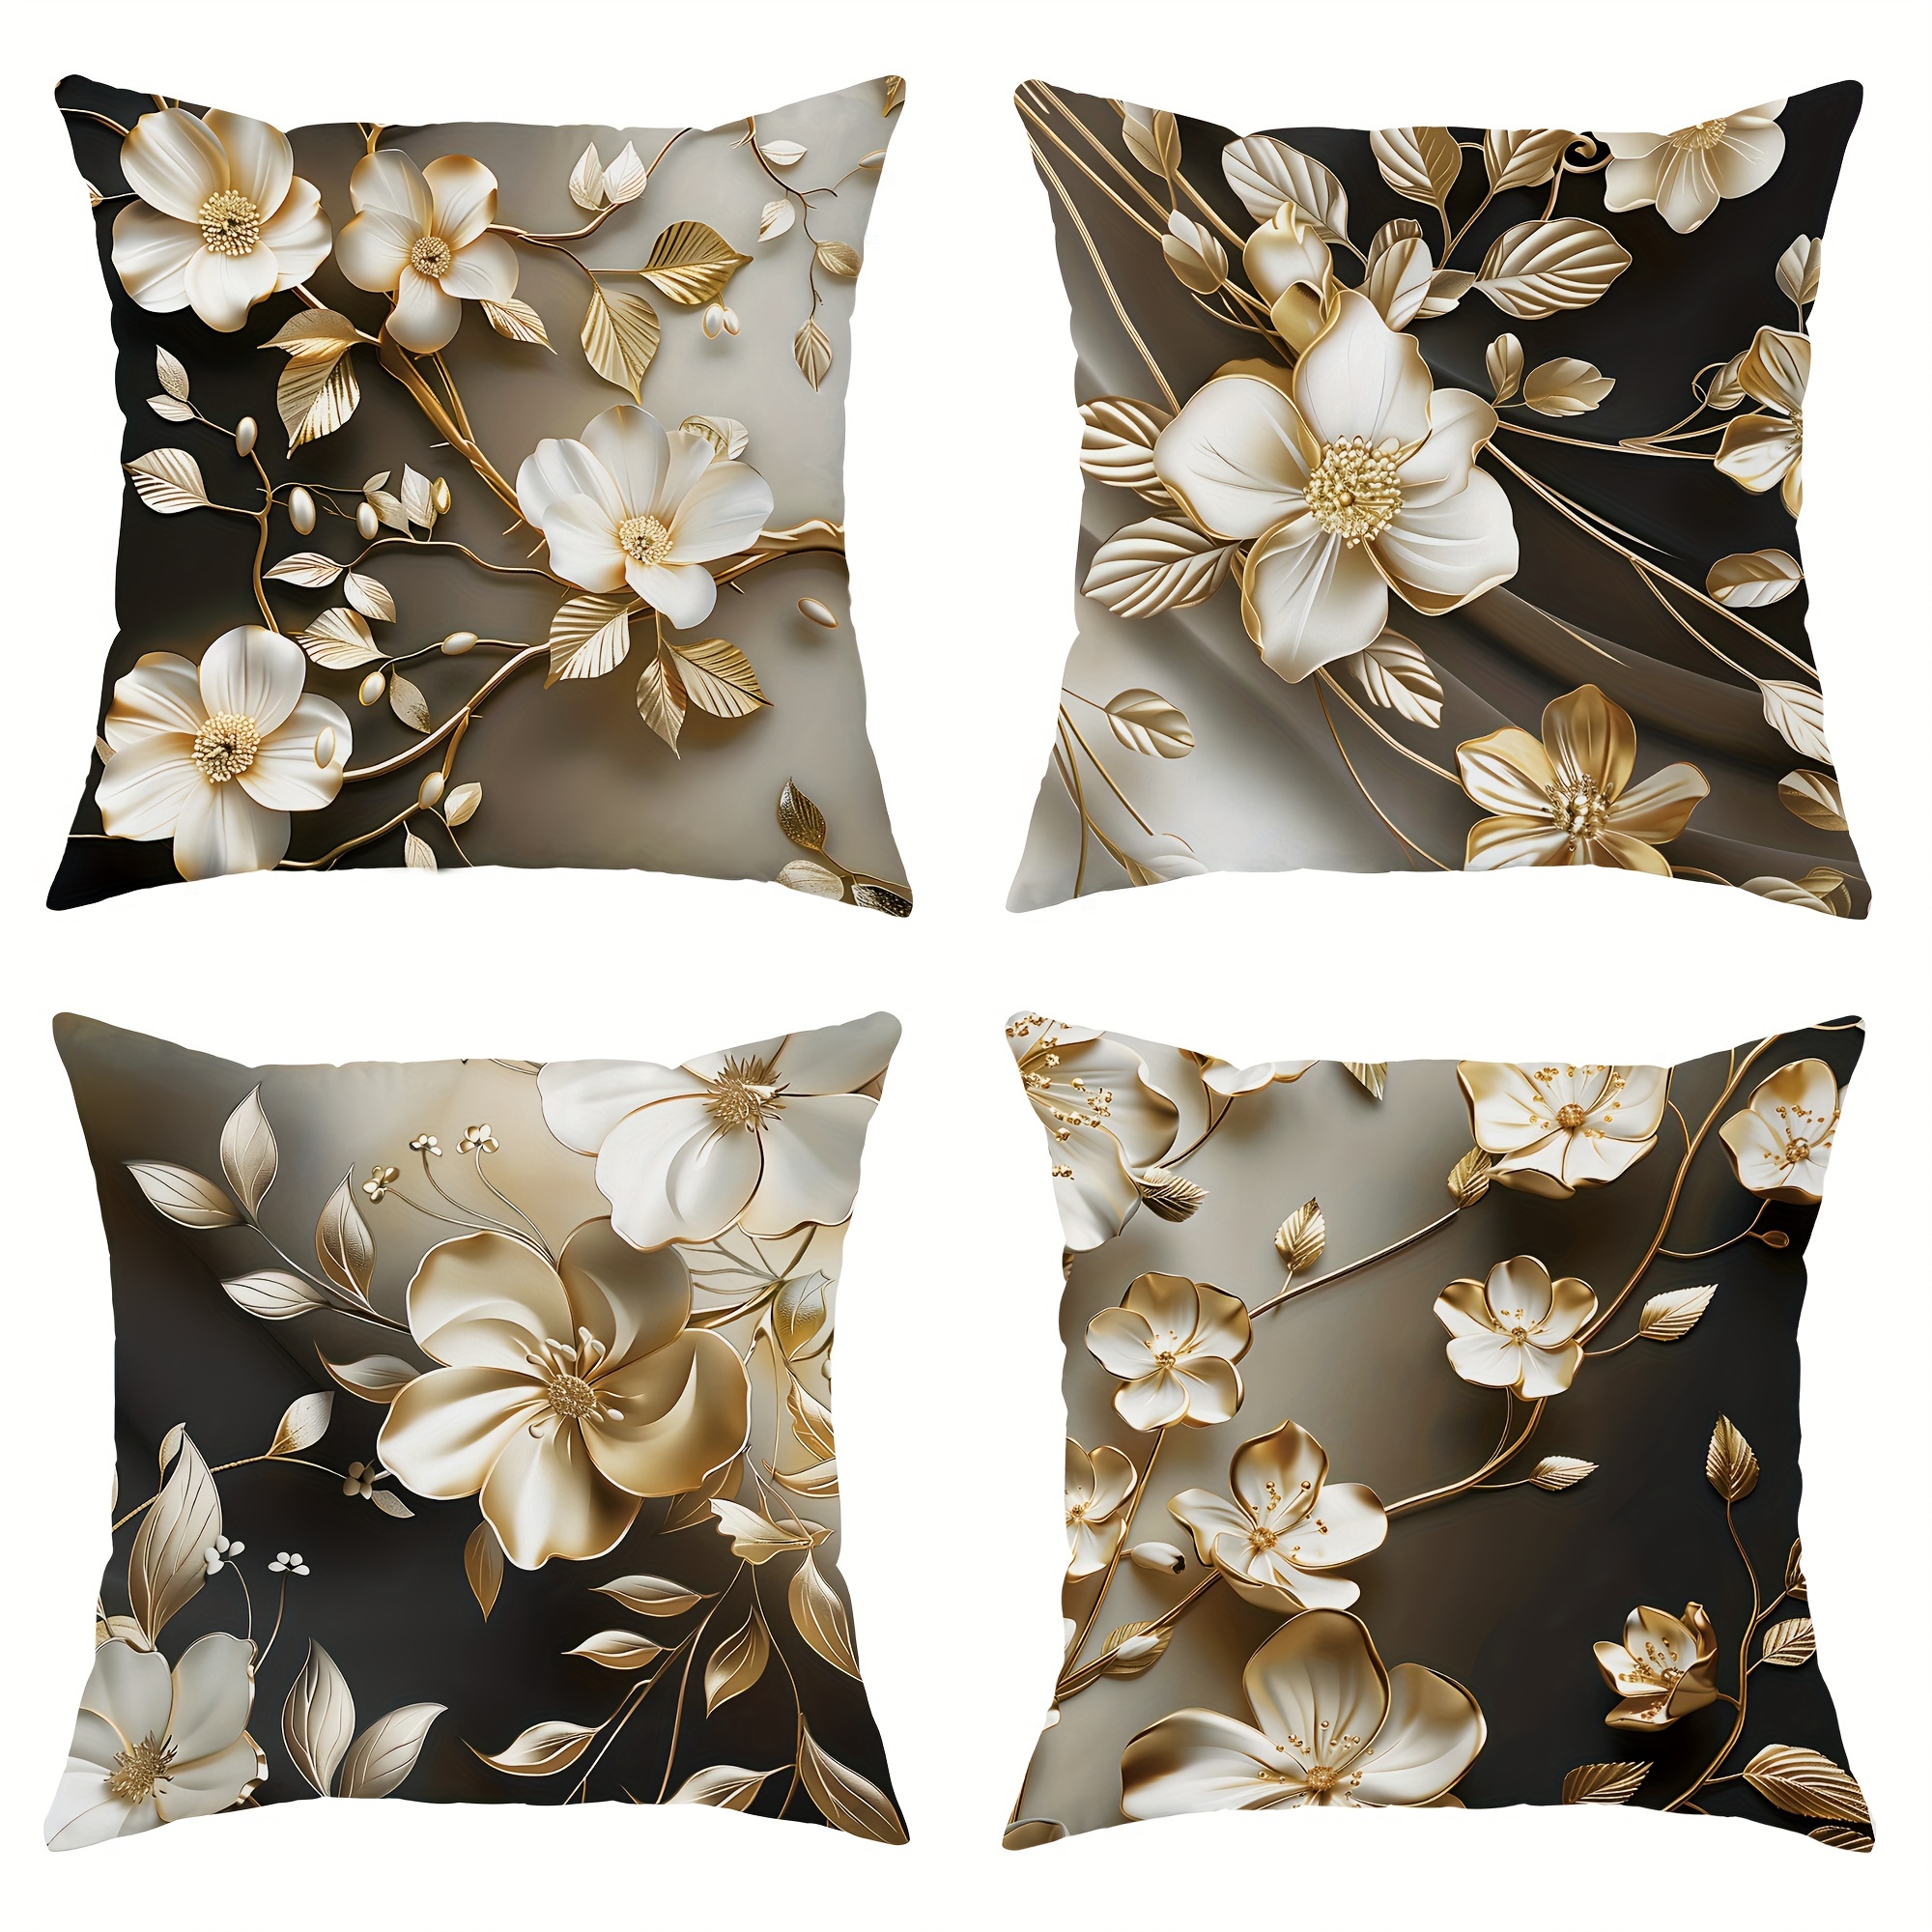 

4pcs, Velvet Throw Pillow Covers, Floral Premium Flower Leaf Gold Black Throw Pillow Covers 18*18inch, For Living Room Bedroom Sofa Bed Decoration